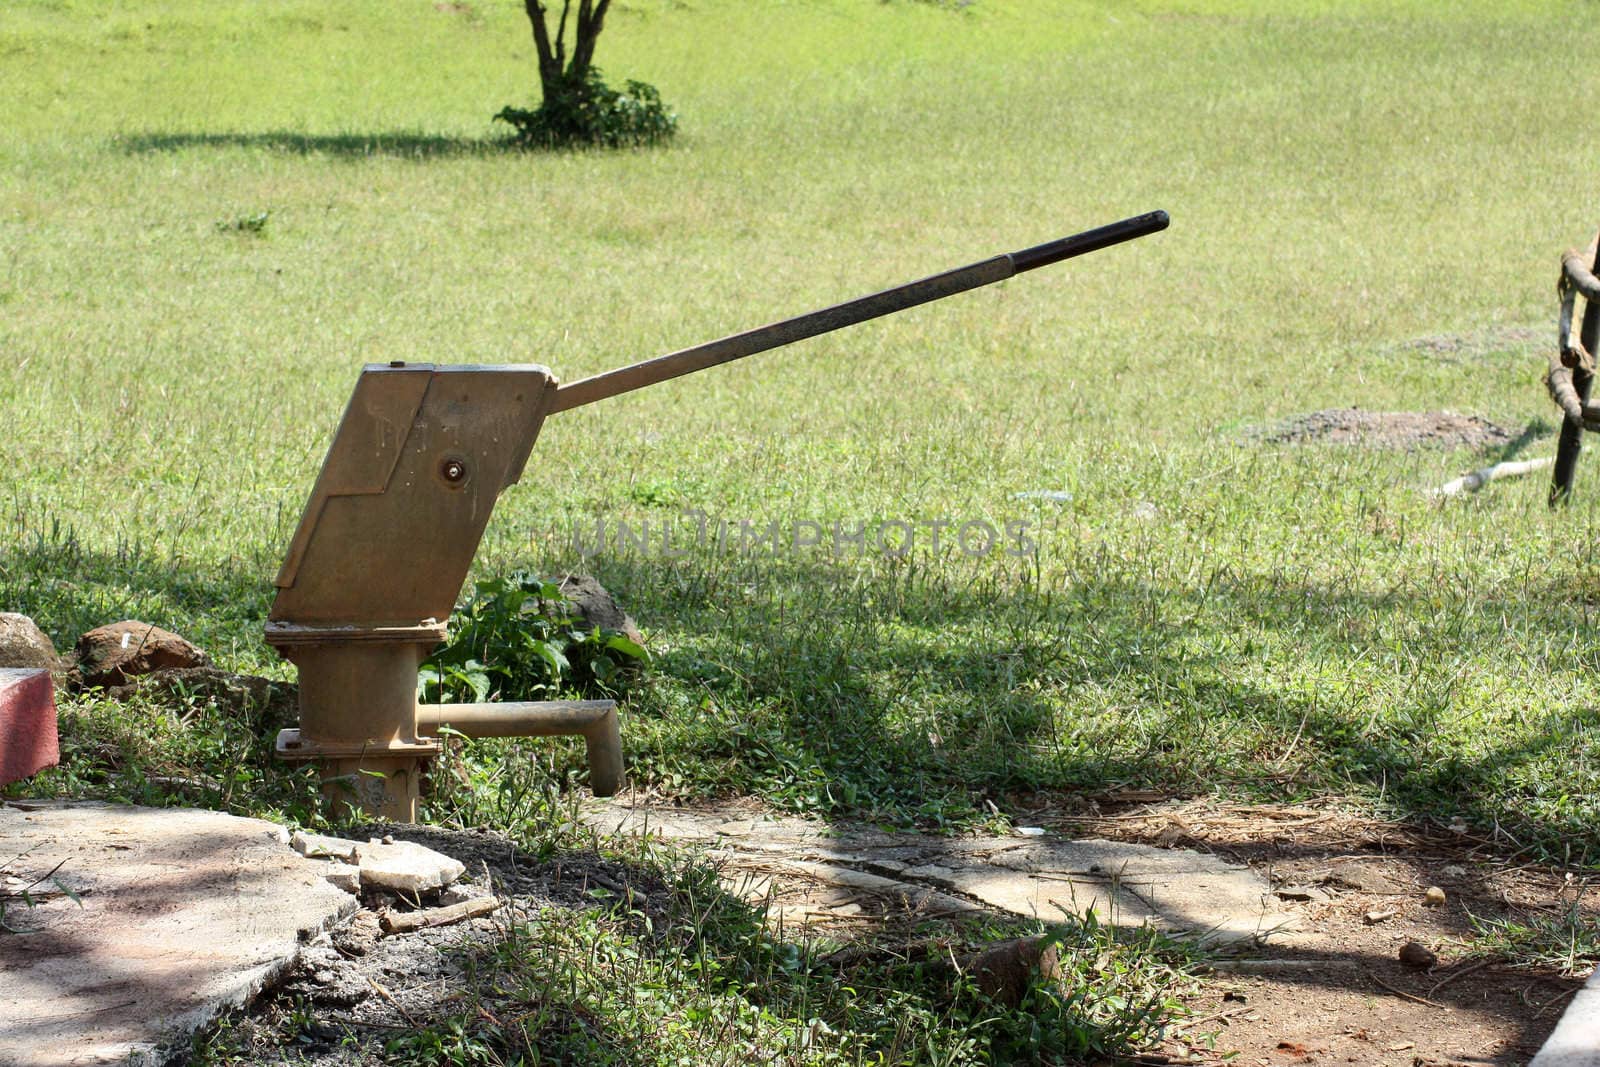 An old rusted water hand pump on an underground well in an Indian village.